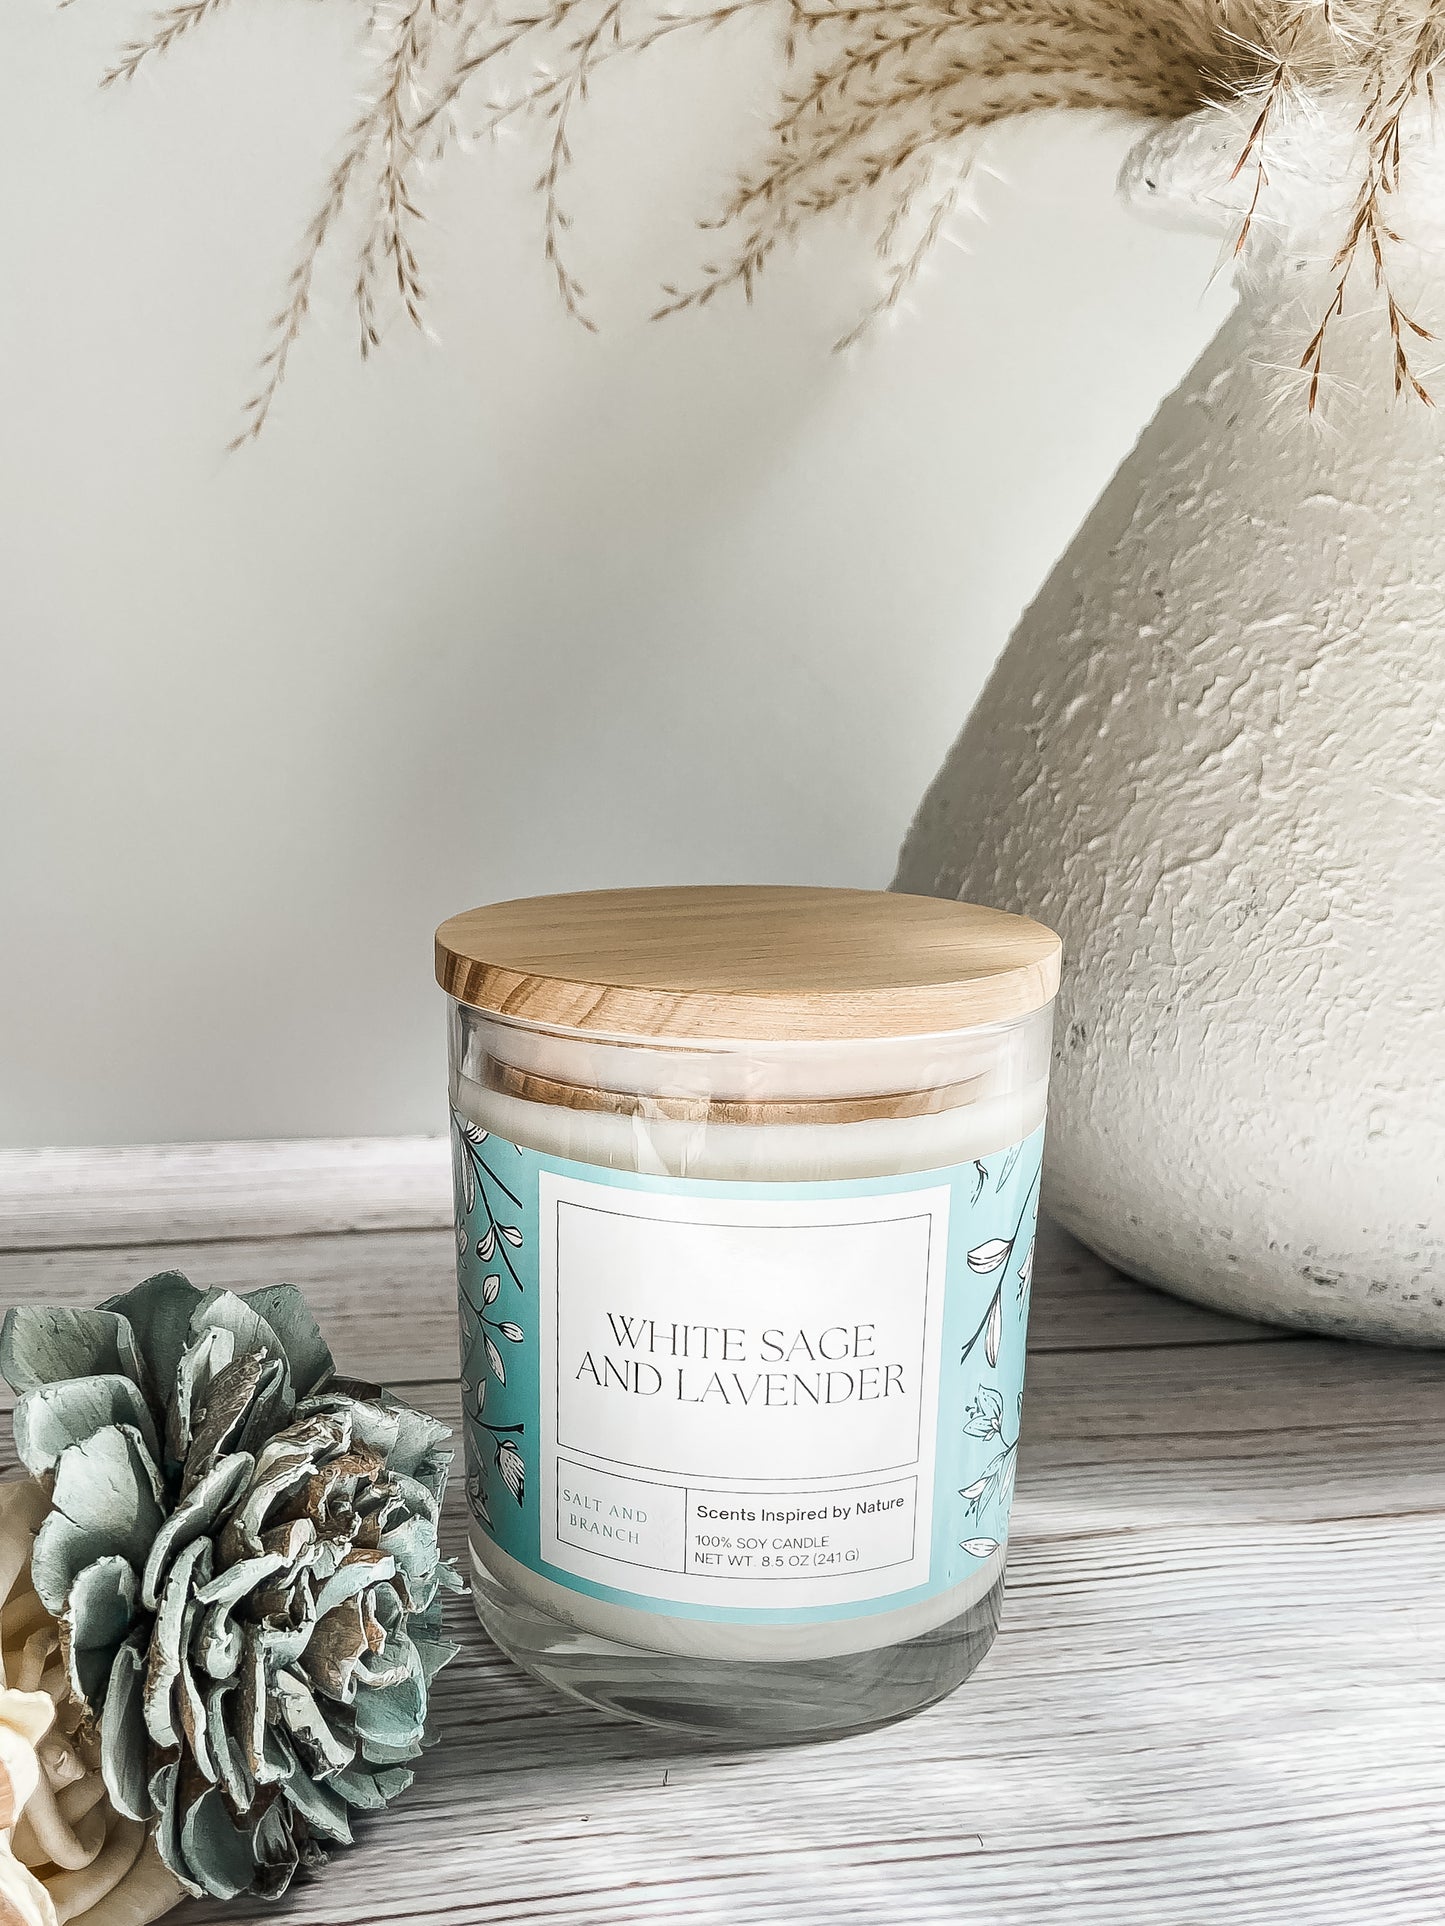 White Sage & Lavender Soy Candle - Salt and Branch